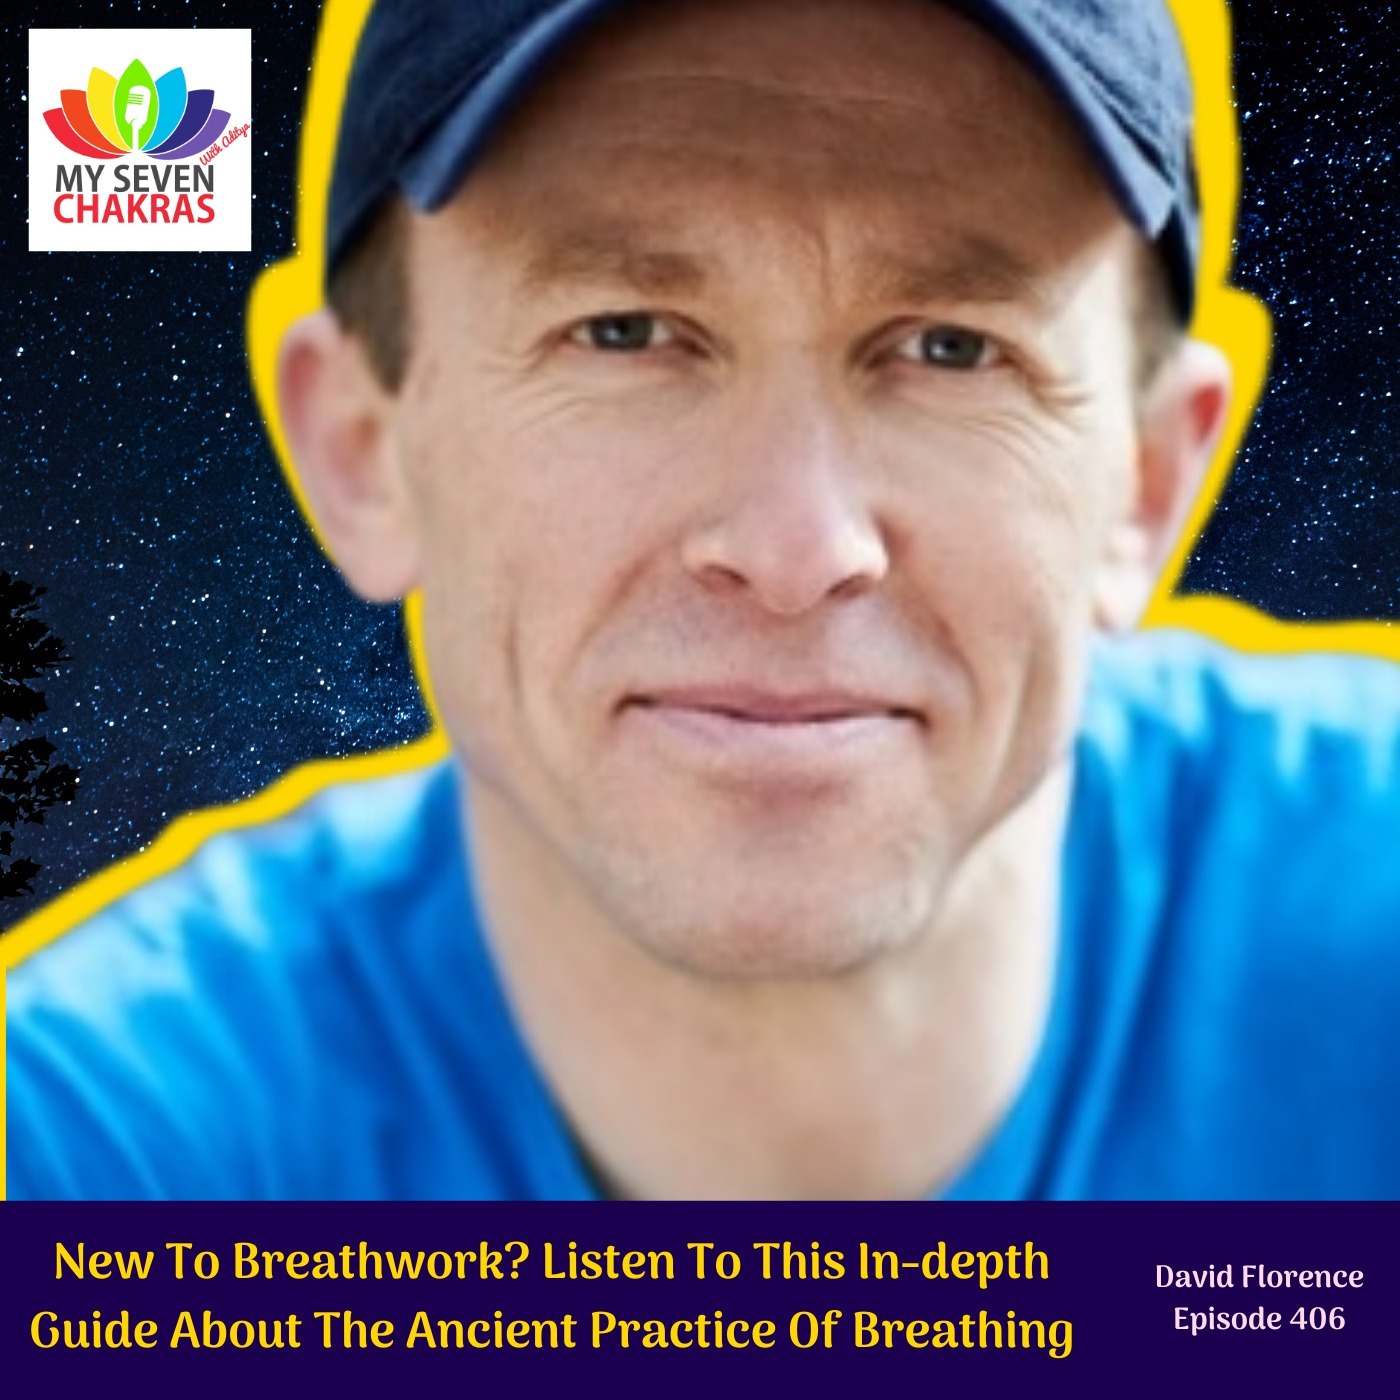 New To Breathwork? Listen To This In-depth Guide About The Ancient Practice Of Breathing